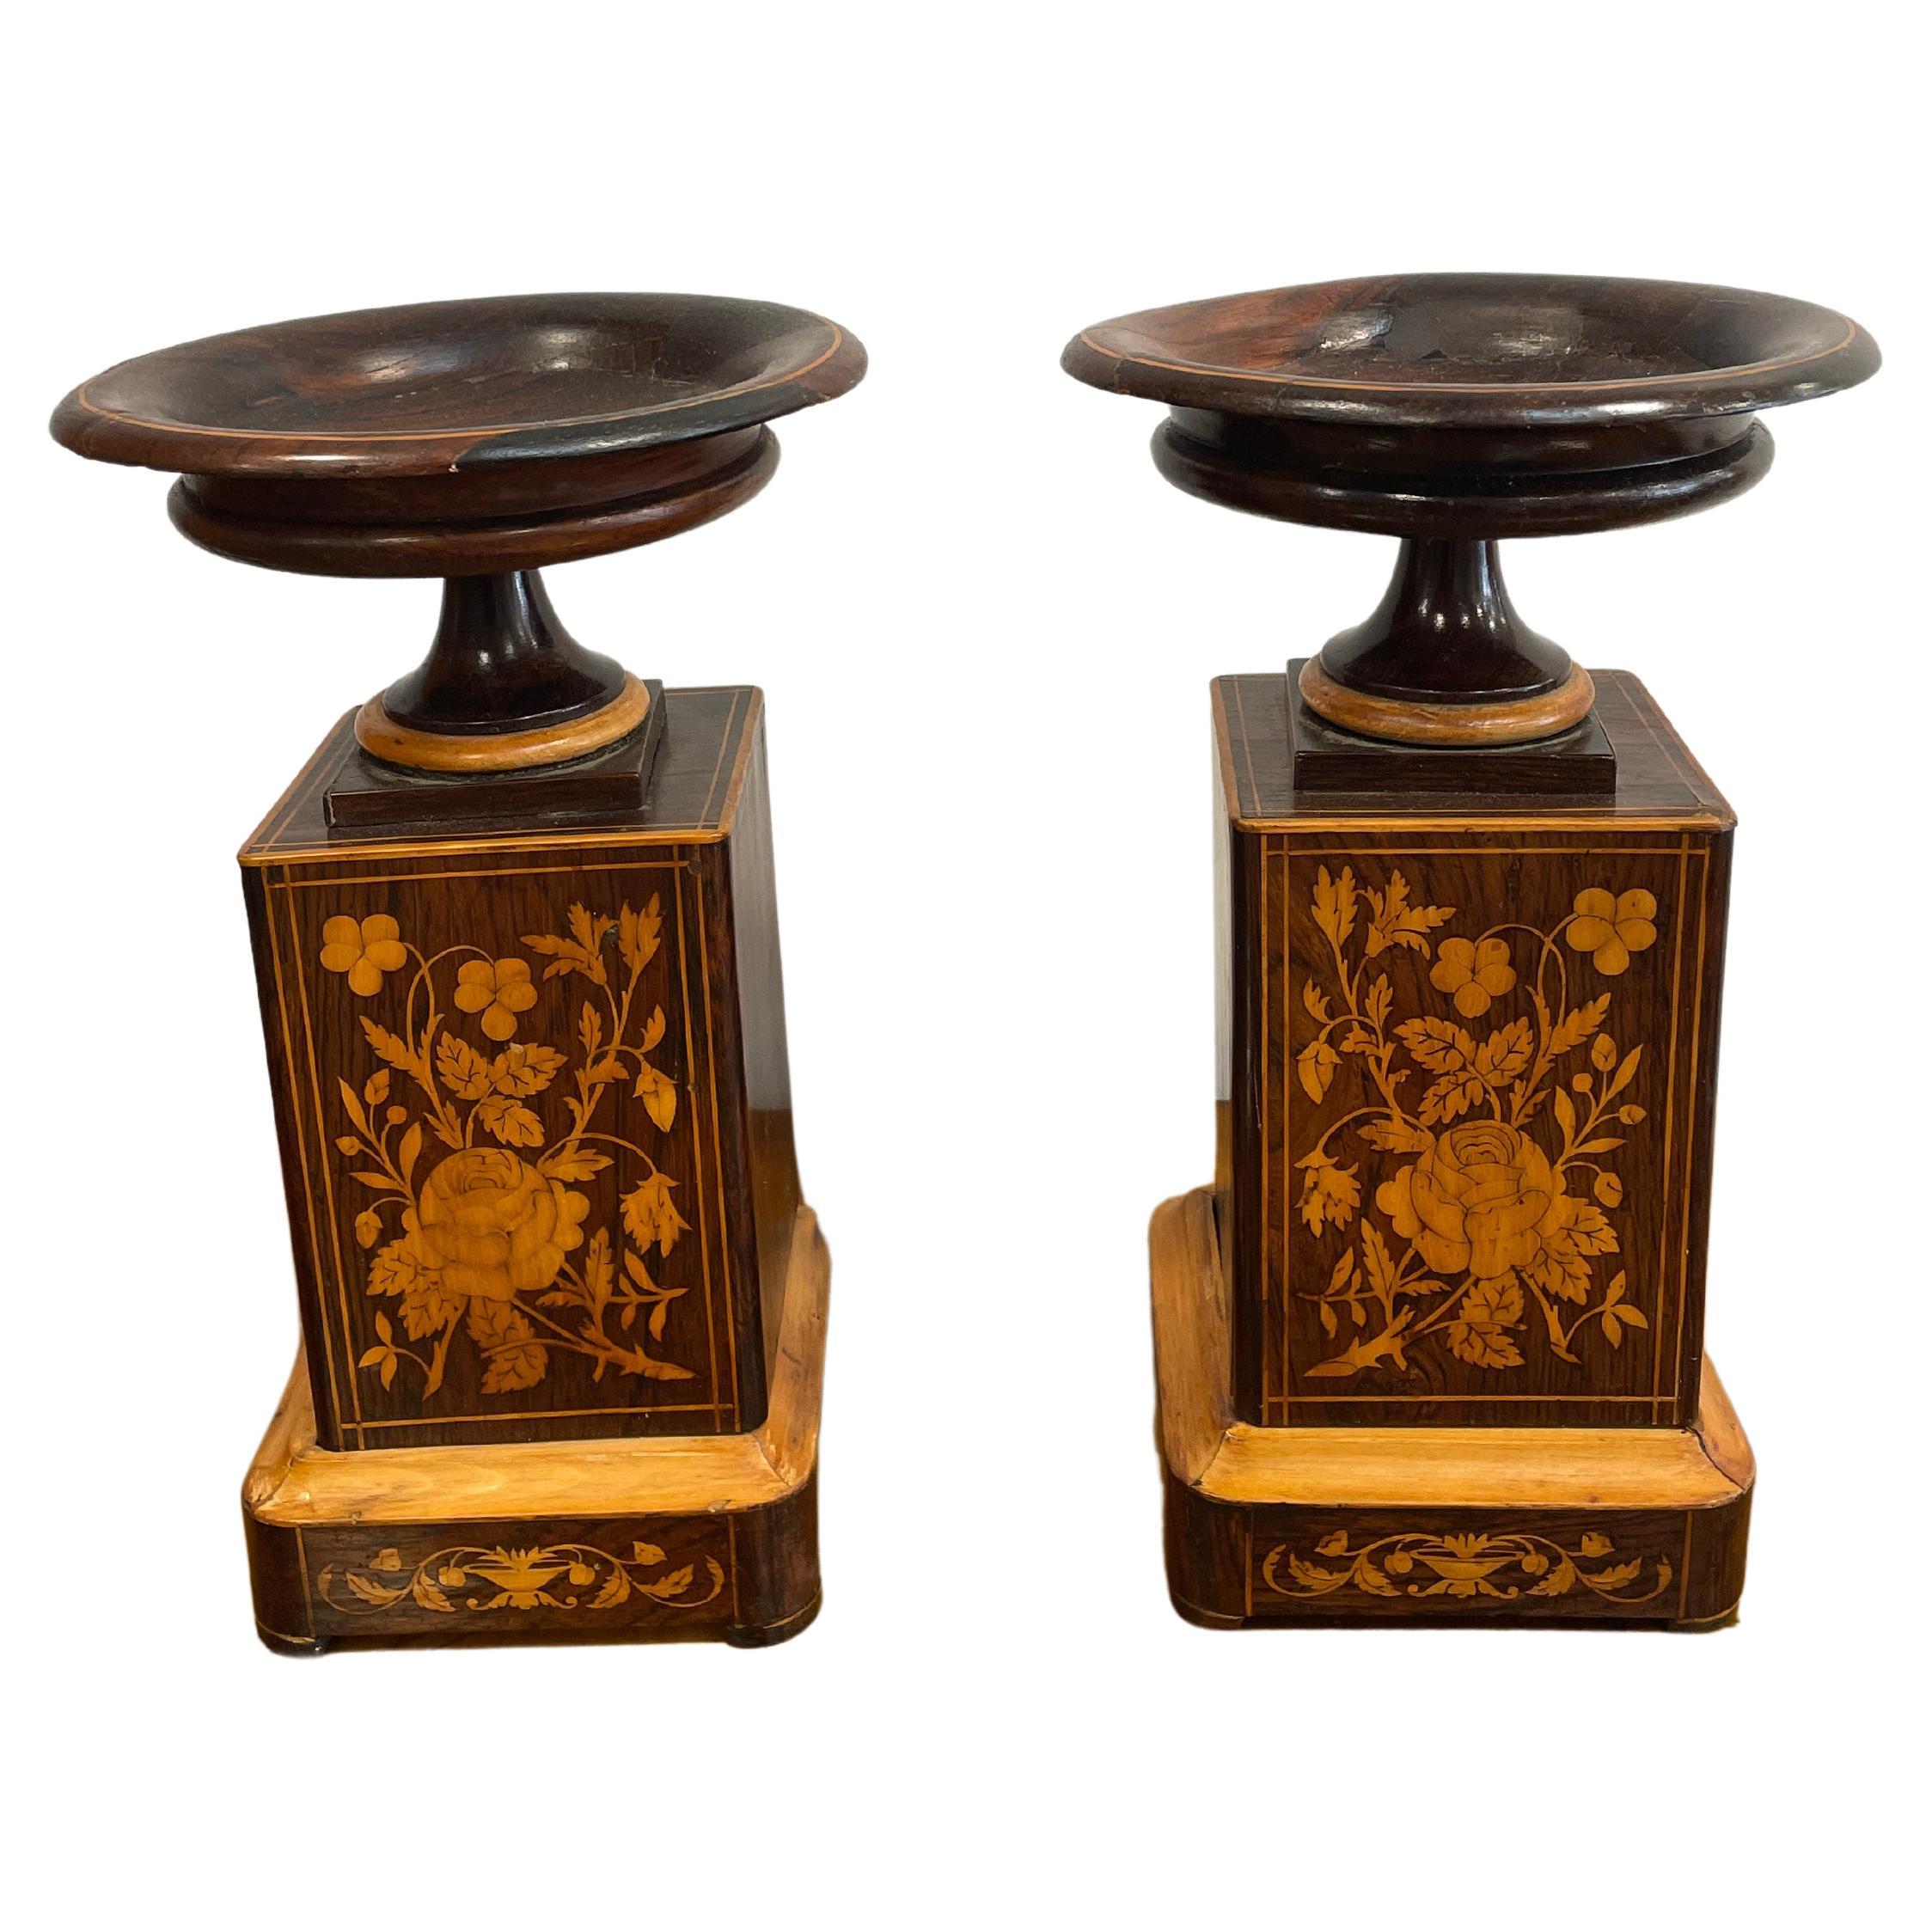 Explore these exquisite French antique vases from 1830, designed as companion pieces for a mantel clock. Crafted with a mahogany veneer and adorned with a stunning maple flower marquetry on the front, these wooden vases emanate timeless